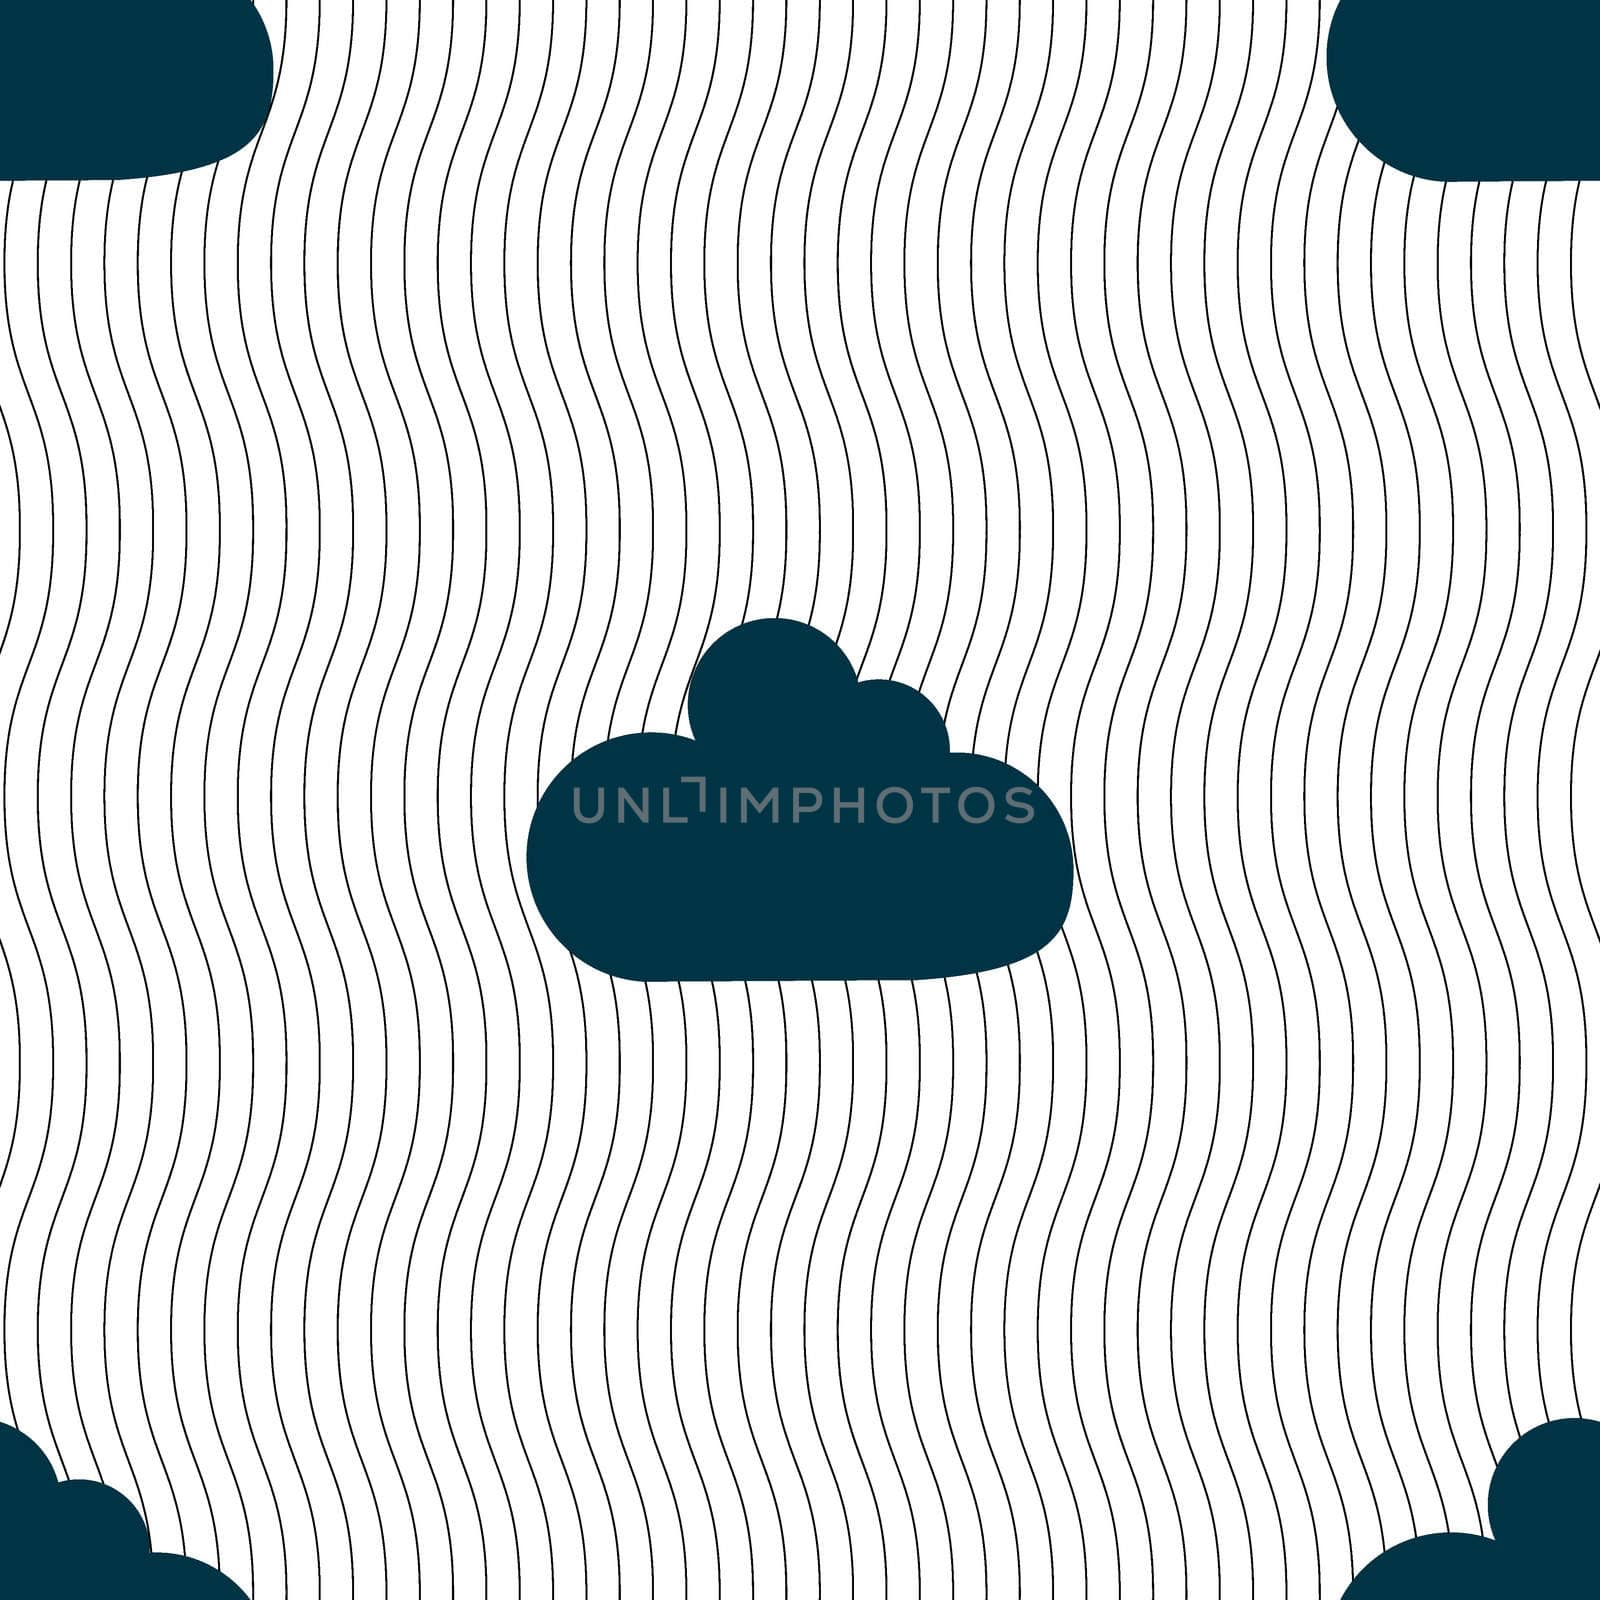 Cloud sign icon. Data storage symbol. Seamless pattern with geometric texture. illustration